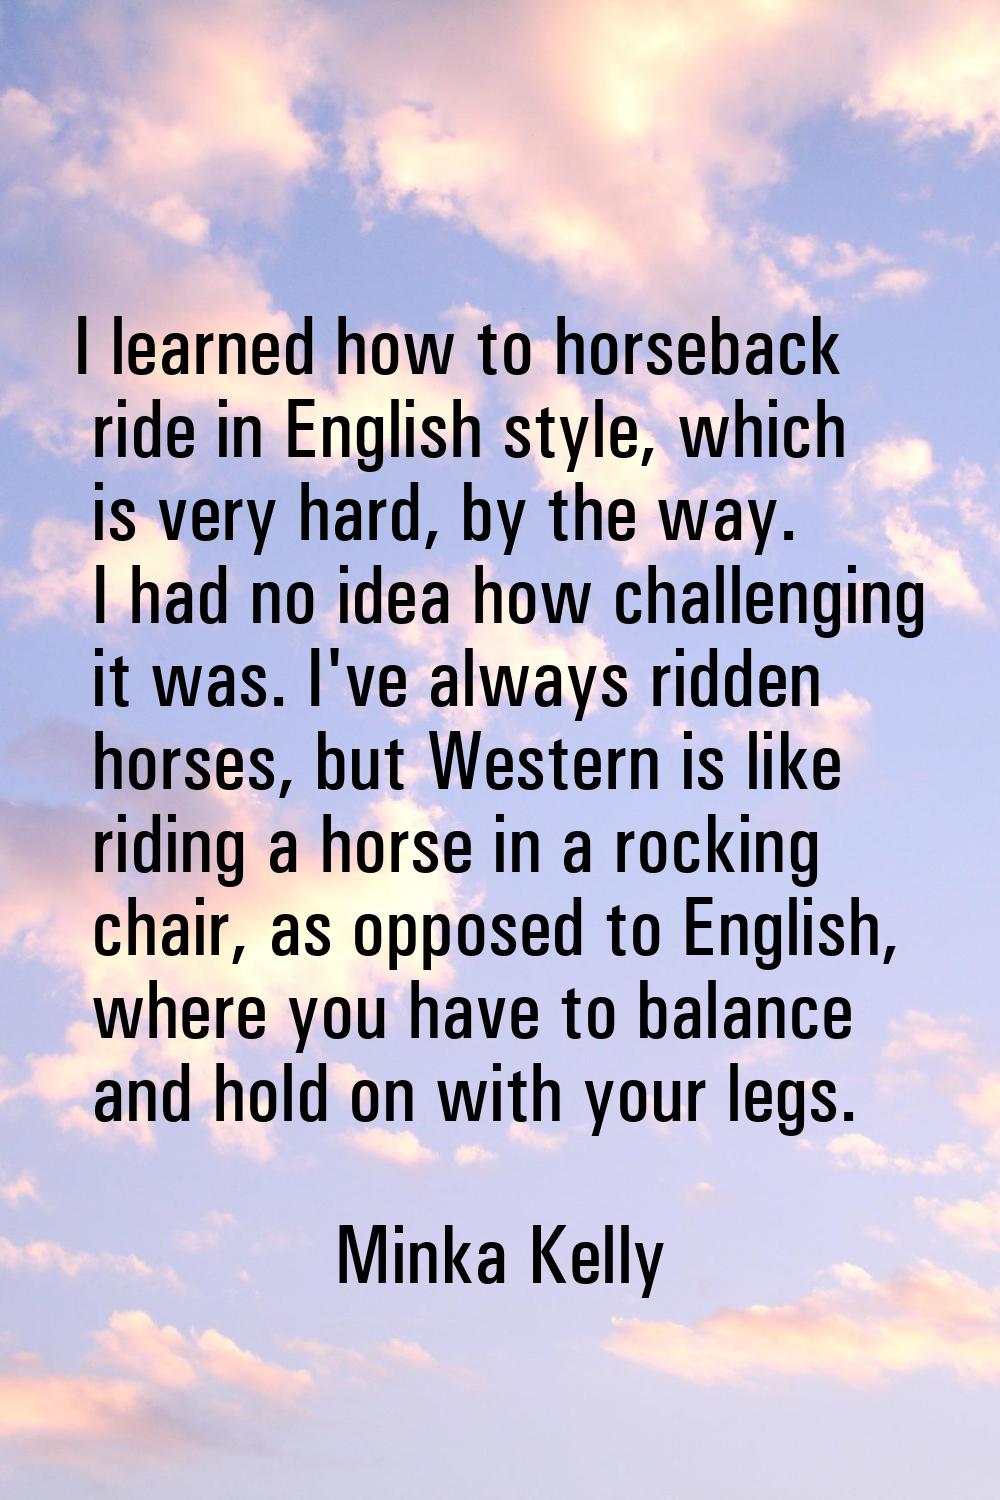 I learned how to horseback ride in English style, which is very hard, by the way. I had no idea how